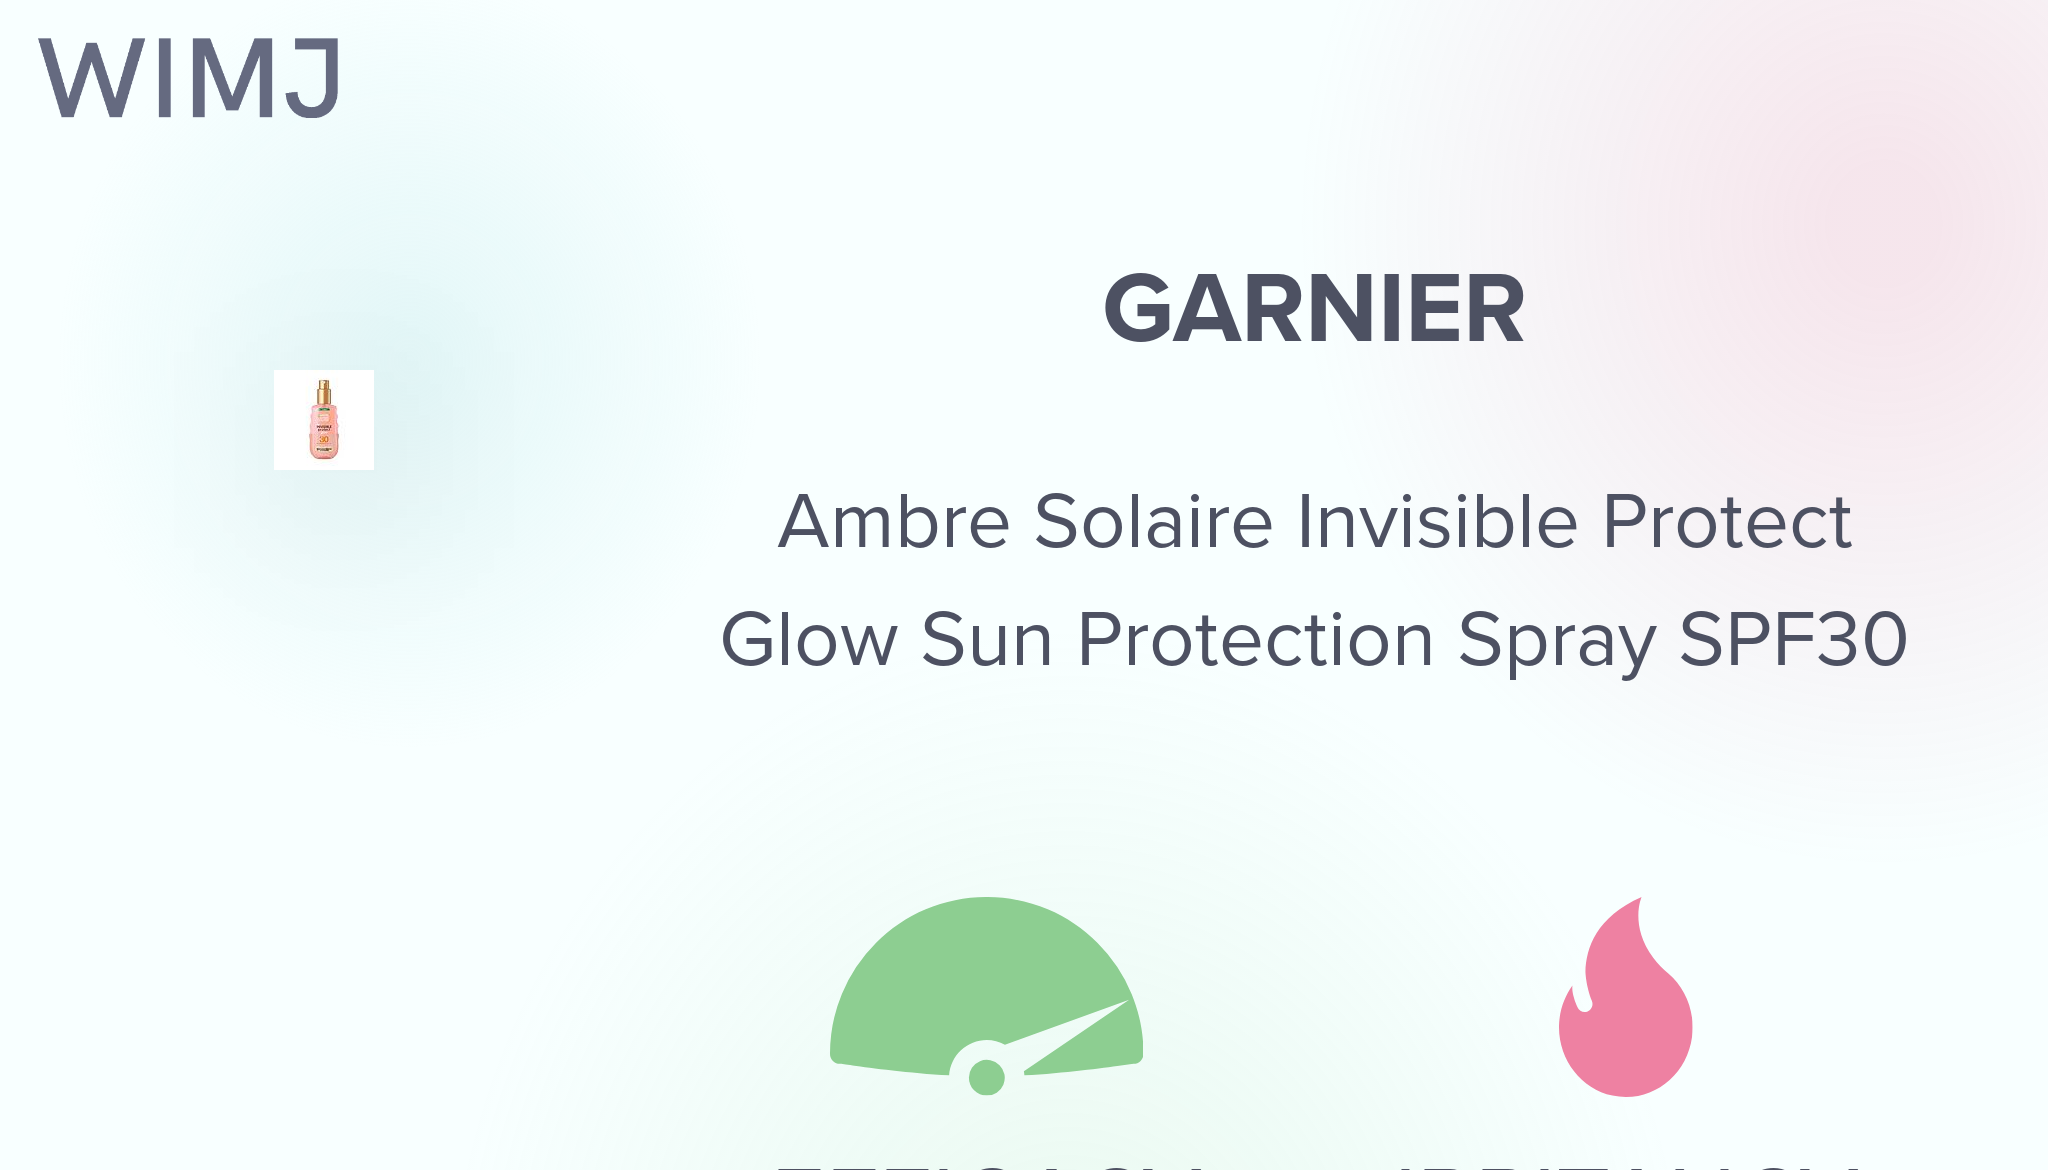 Review: Garnier - Ambre Solaire Invisible Protect Glow Sun Protection Spray  SPF30 - WIMJ | Sonnensprays